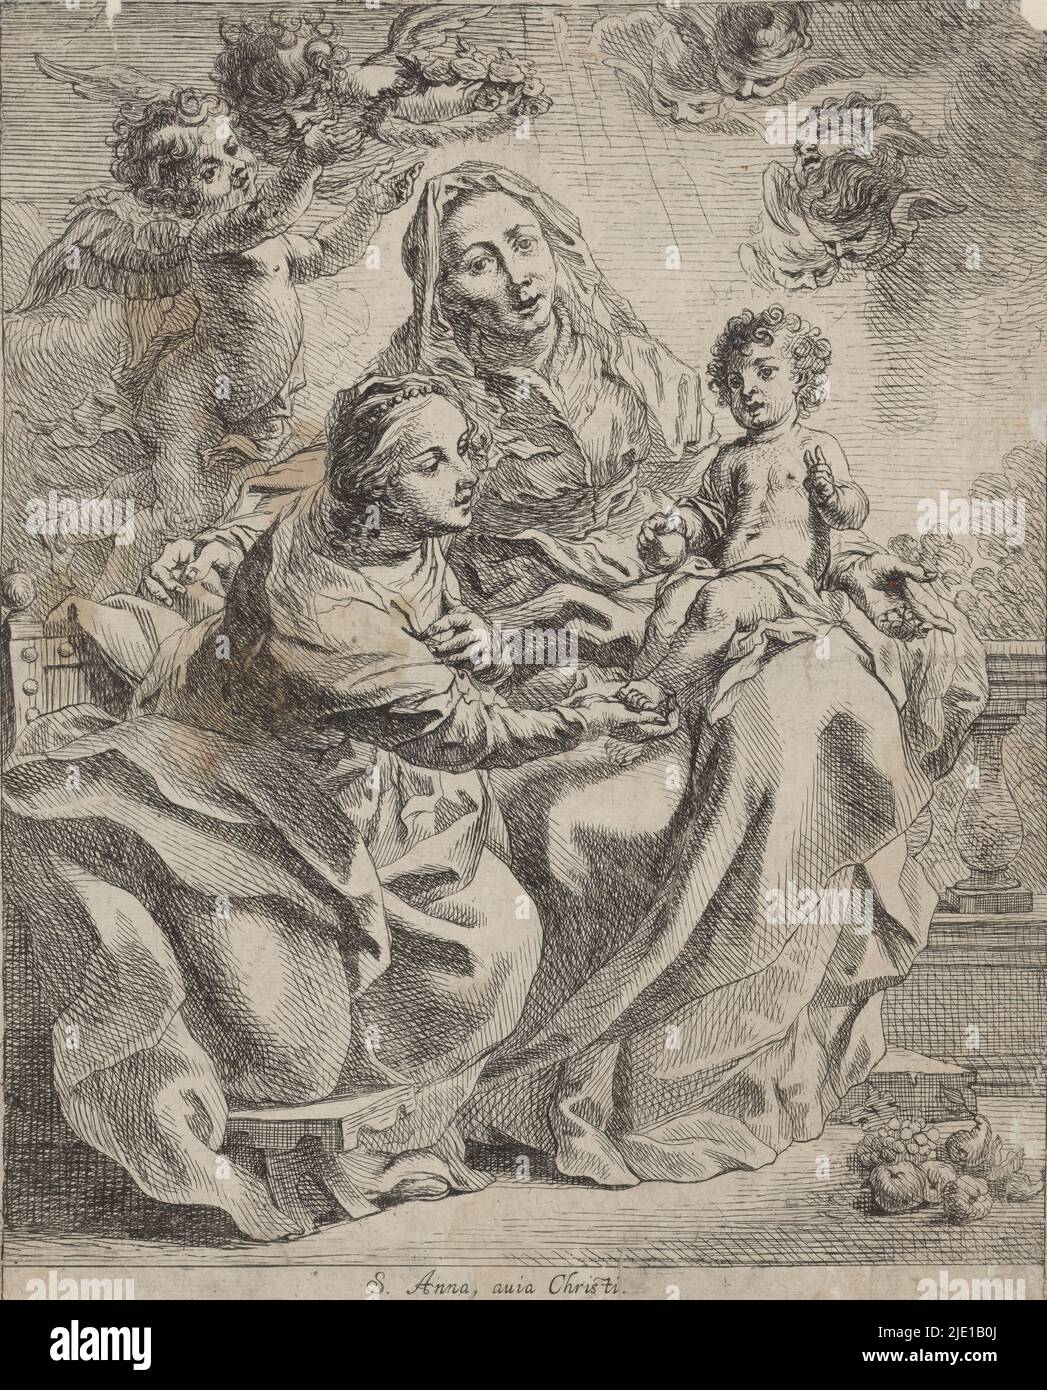 Anna in Three, S. Anna, avia Christi (title on object), Mary with Child and Saint Anna. St. Anna is seated with the Child Jesus on her lap; next to her is Mary, holding the child's feet. Angels above them. Fruits lie on the ground., print maker: Remoldus Eynhoudts, after painting by: Cornelis Schut (I), Antwerp, 1626 - 1680, paper, etching, height 273 mm × width 223 mm Stock Photo